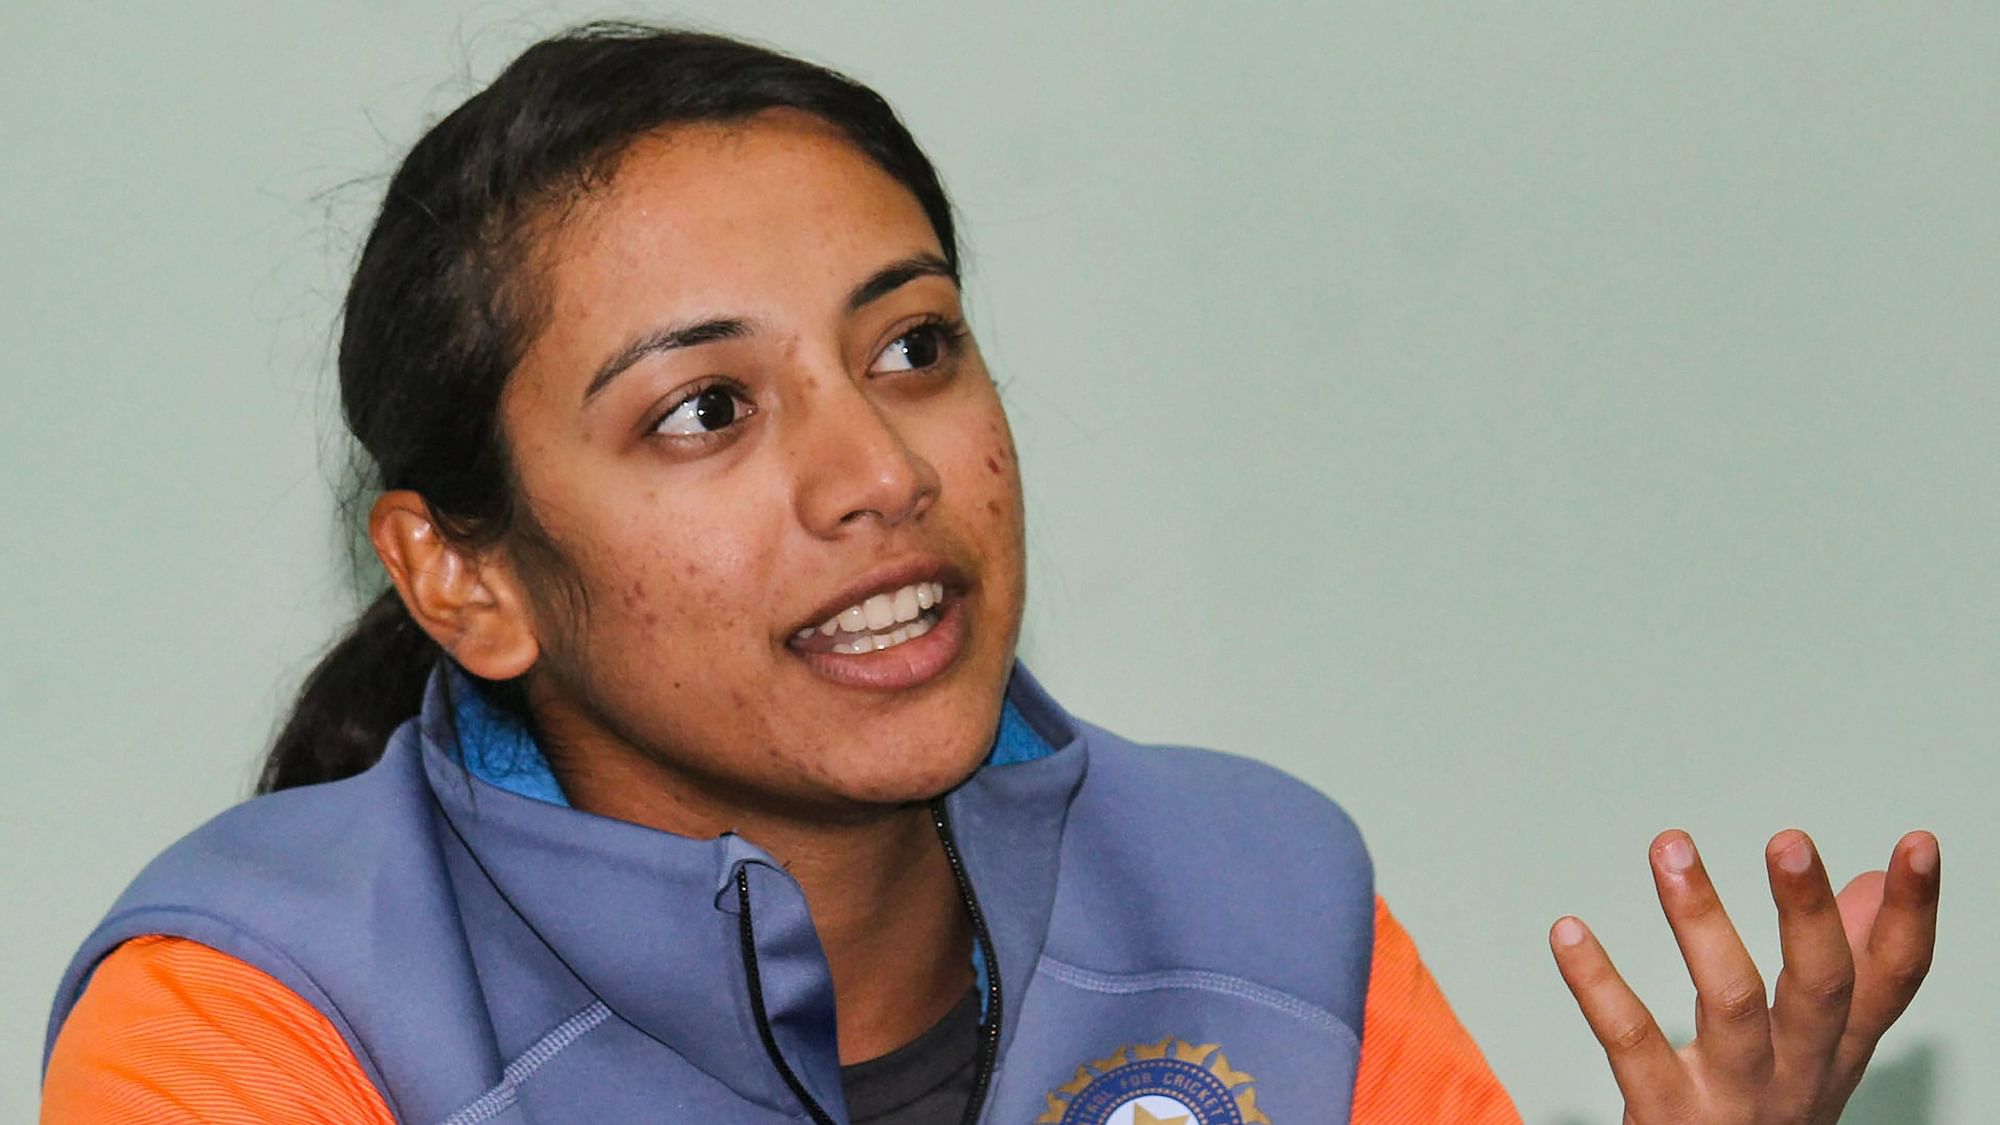 The Indian women’s cricket team’s stand-in T20 skipper Smriti Mandhana feels fearless batters have to step up in the domestic circuit.